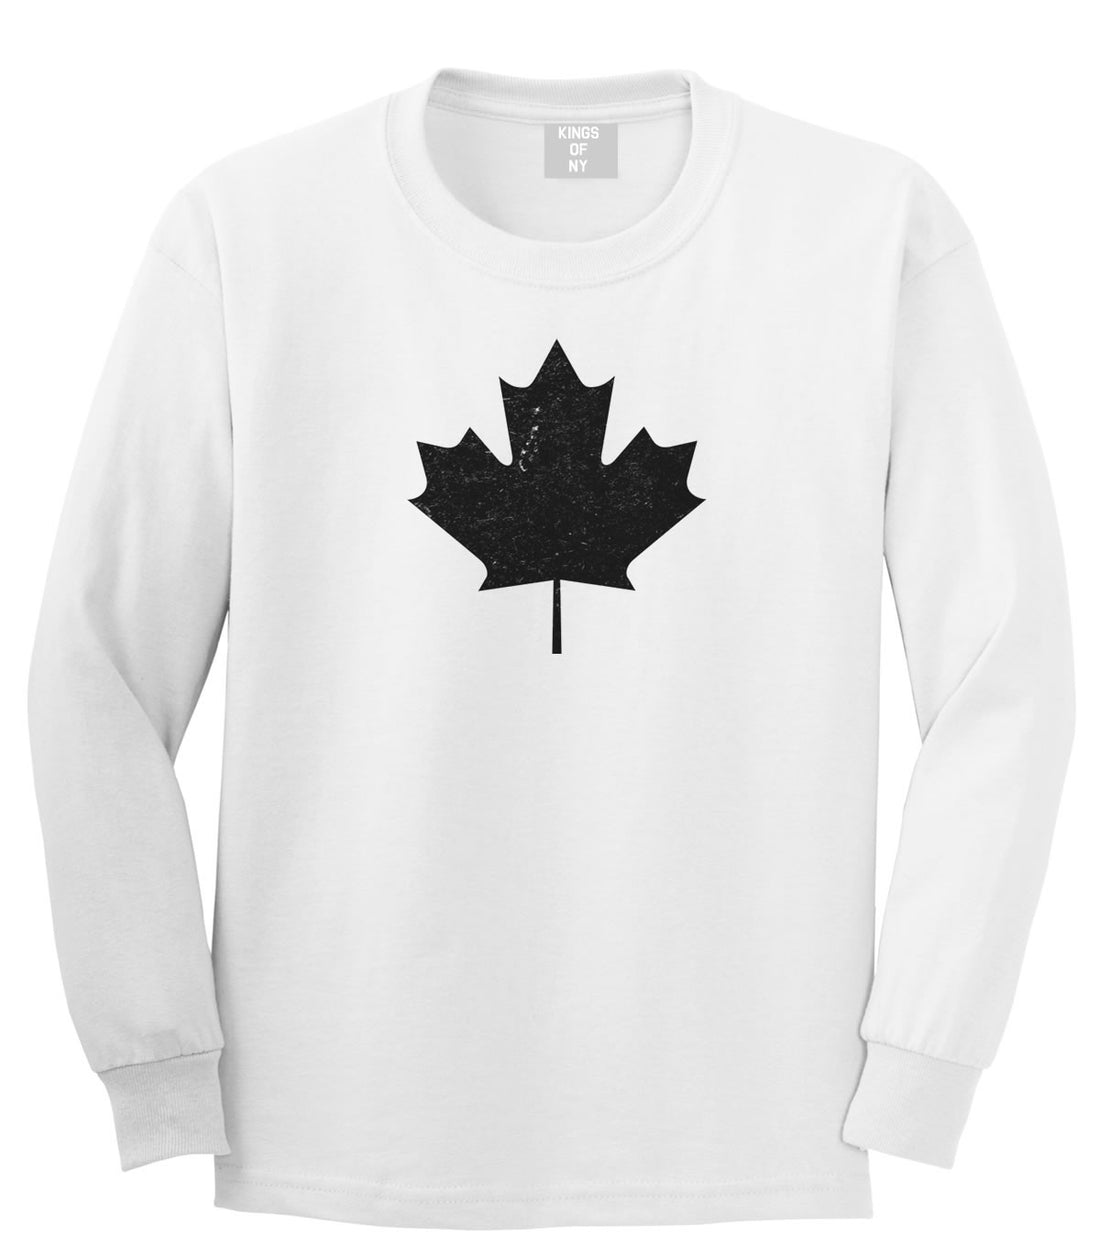 Maple Leaf Long Sleeve T-Shirt by Kings Of NY